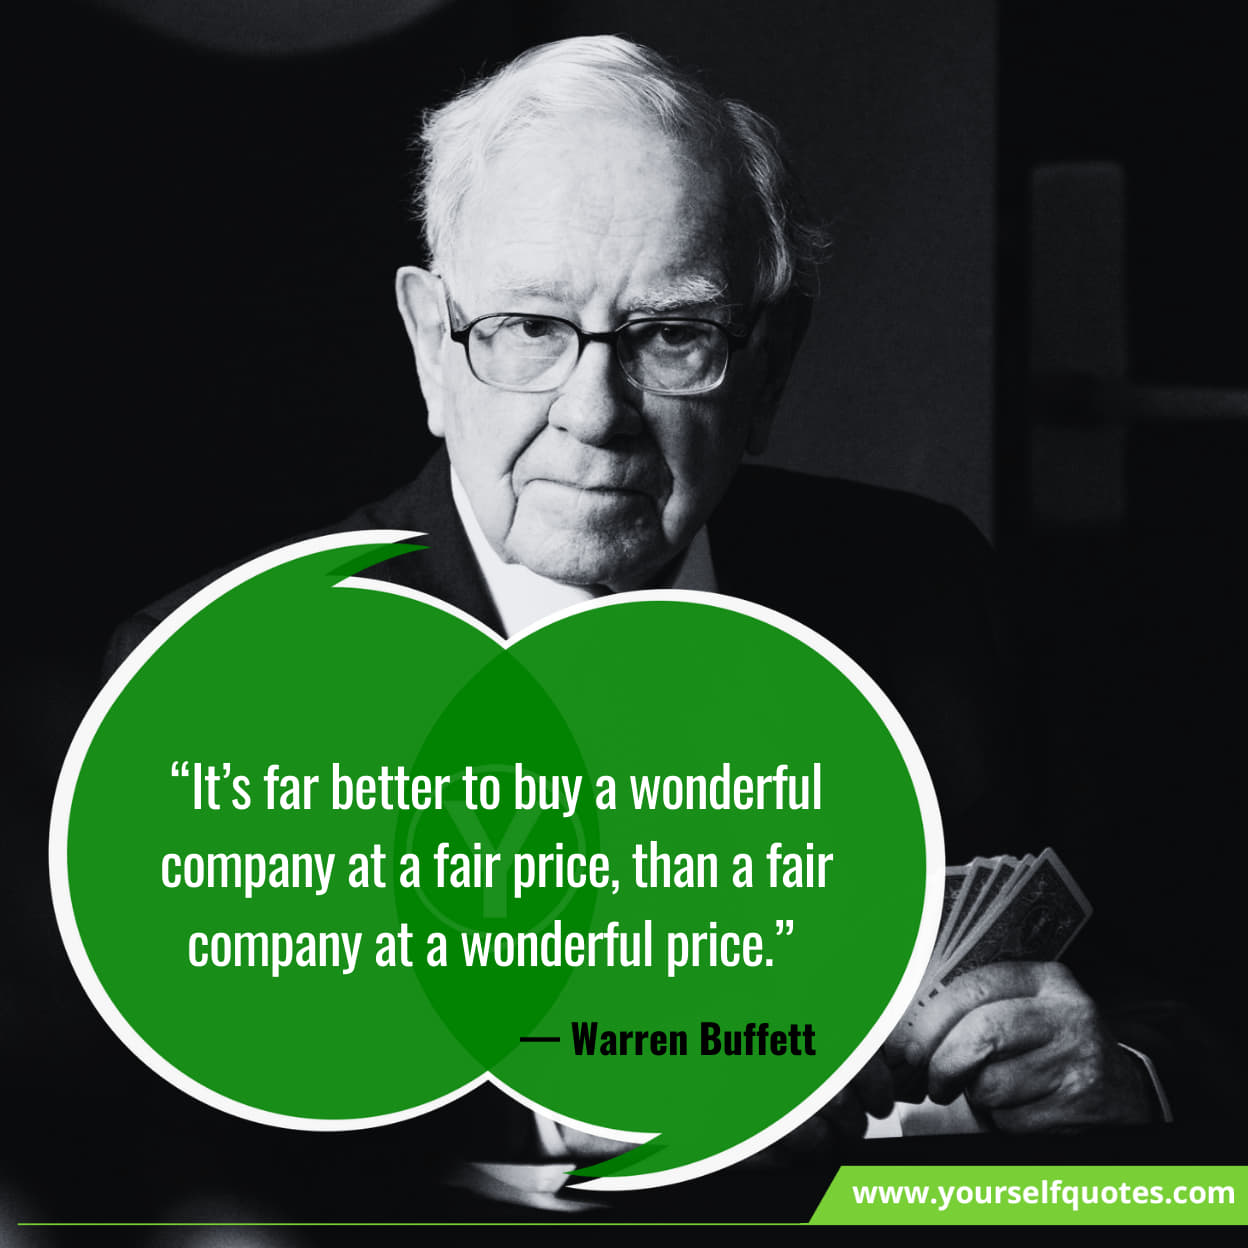 Stock Market Quotes To Make You A Better Investor